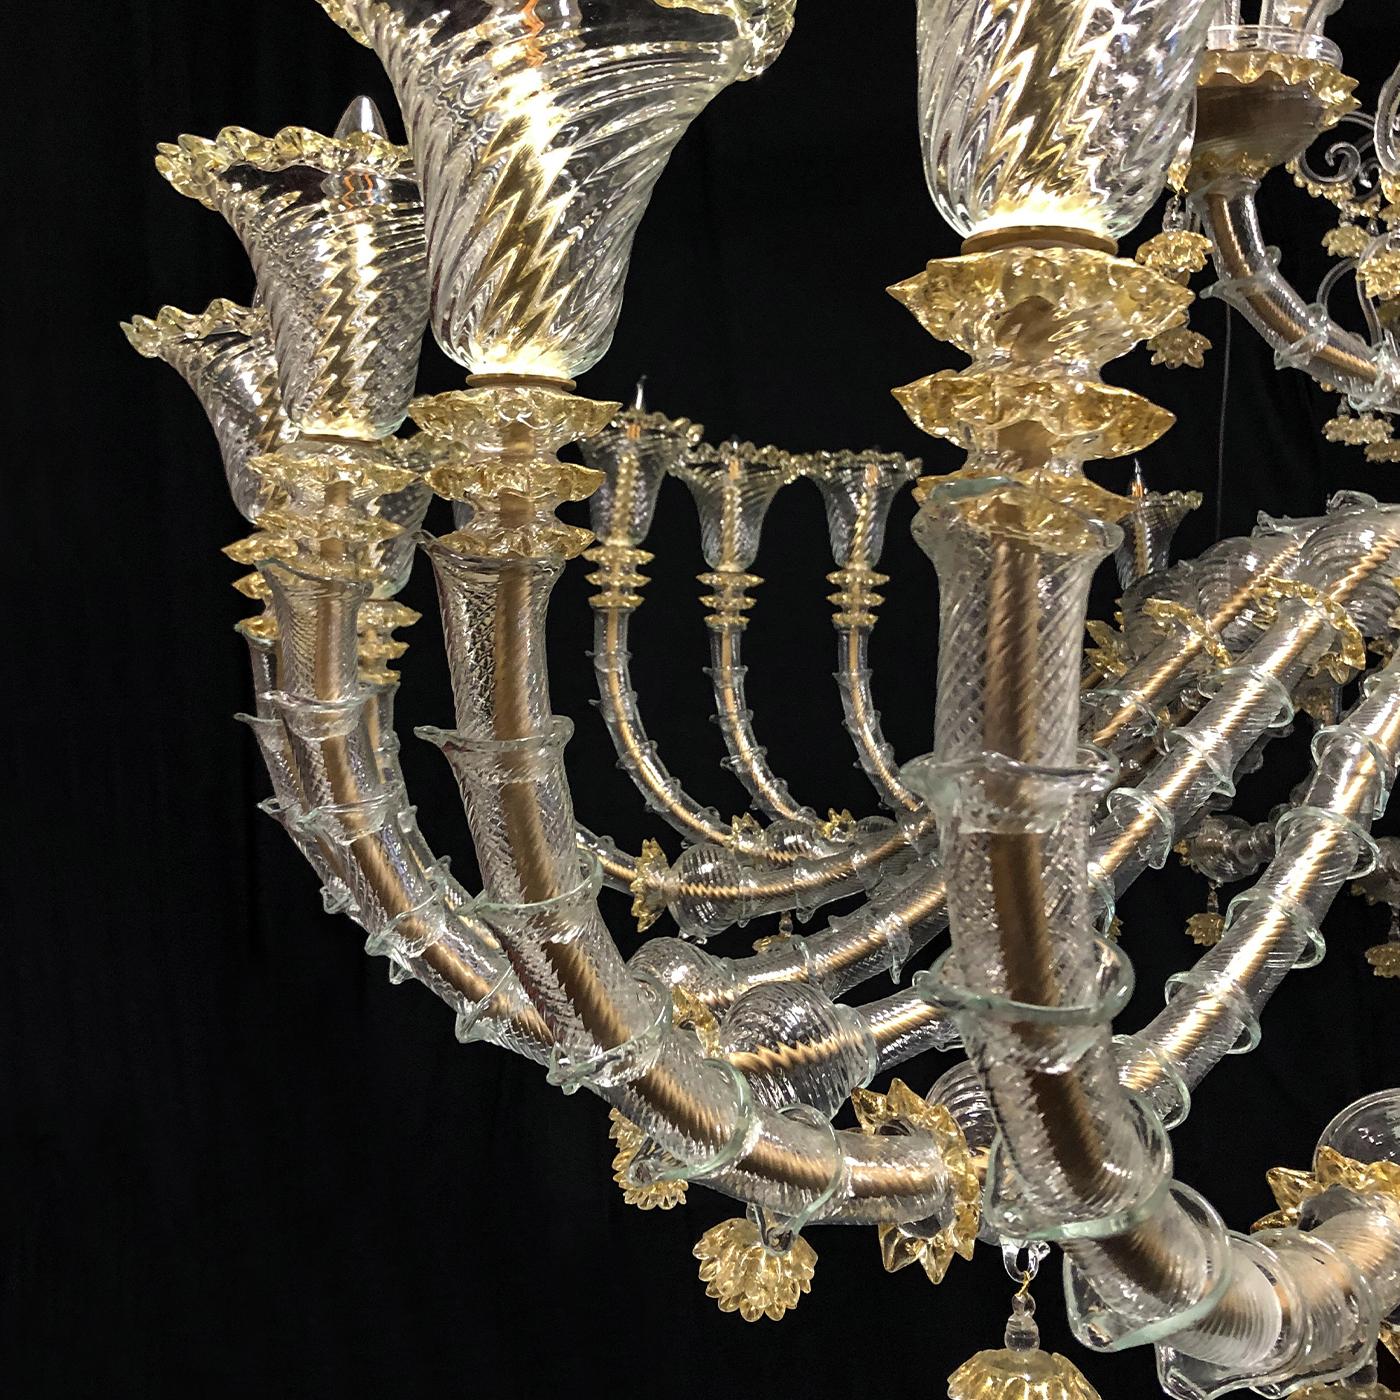 The epitome of opulent design, this extraordinary XVII Rezzonico-style chandelier will imbue a sophisticated modern interior with rare savoir-faire. Meticulously handcrafted with great attention to details by master artisans of the Venetian